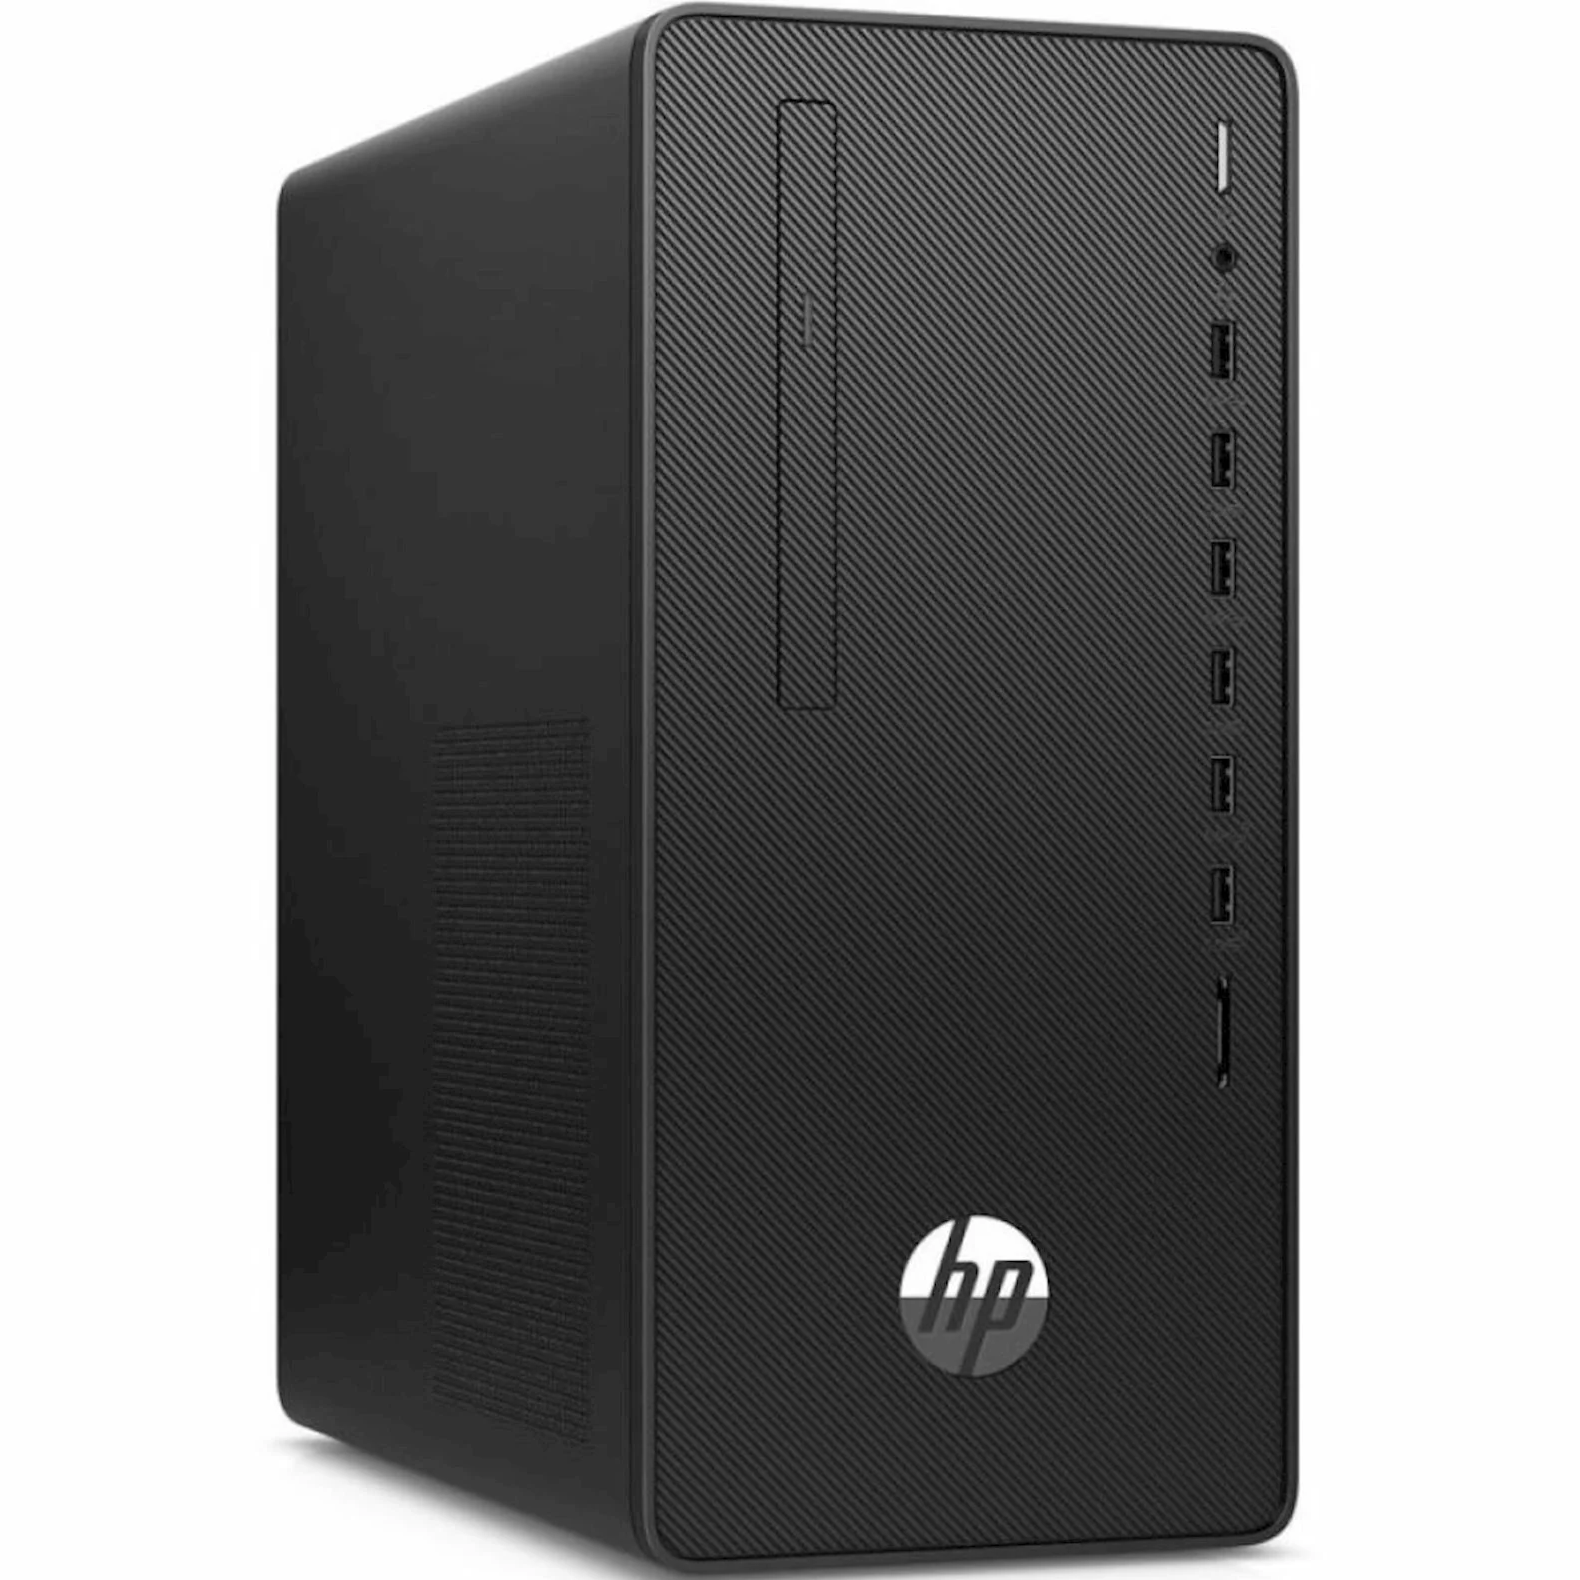 HP 290 G4 Microtower PC Intel Core i7-10700 2.9 up to 4.8 GHz 8 GB (1 x 8) DDR4 2933 MHz 256GB SSD DVD-RW Intel UHD Graphics 630 10 100 1000 Mbps 180W FreeDOS One Year Warranty USB Keyboard and Mouse - 23H44EA